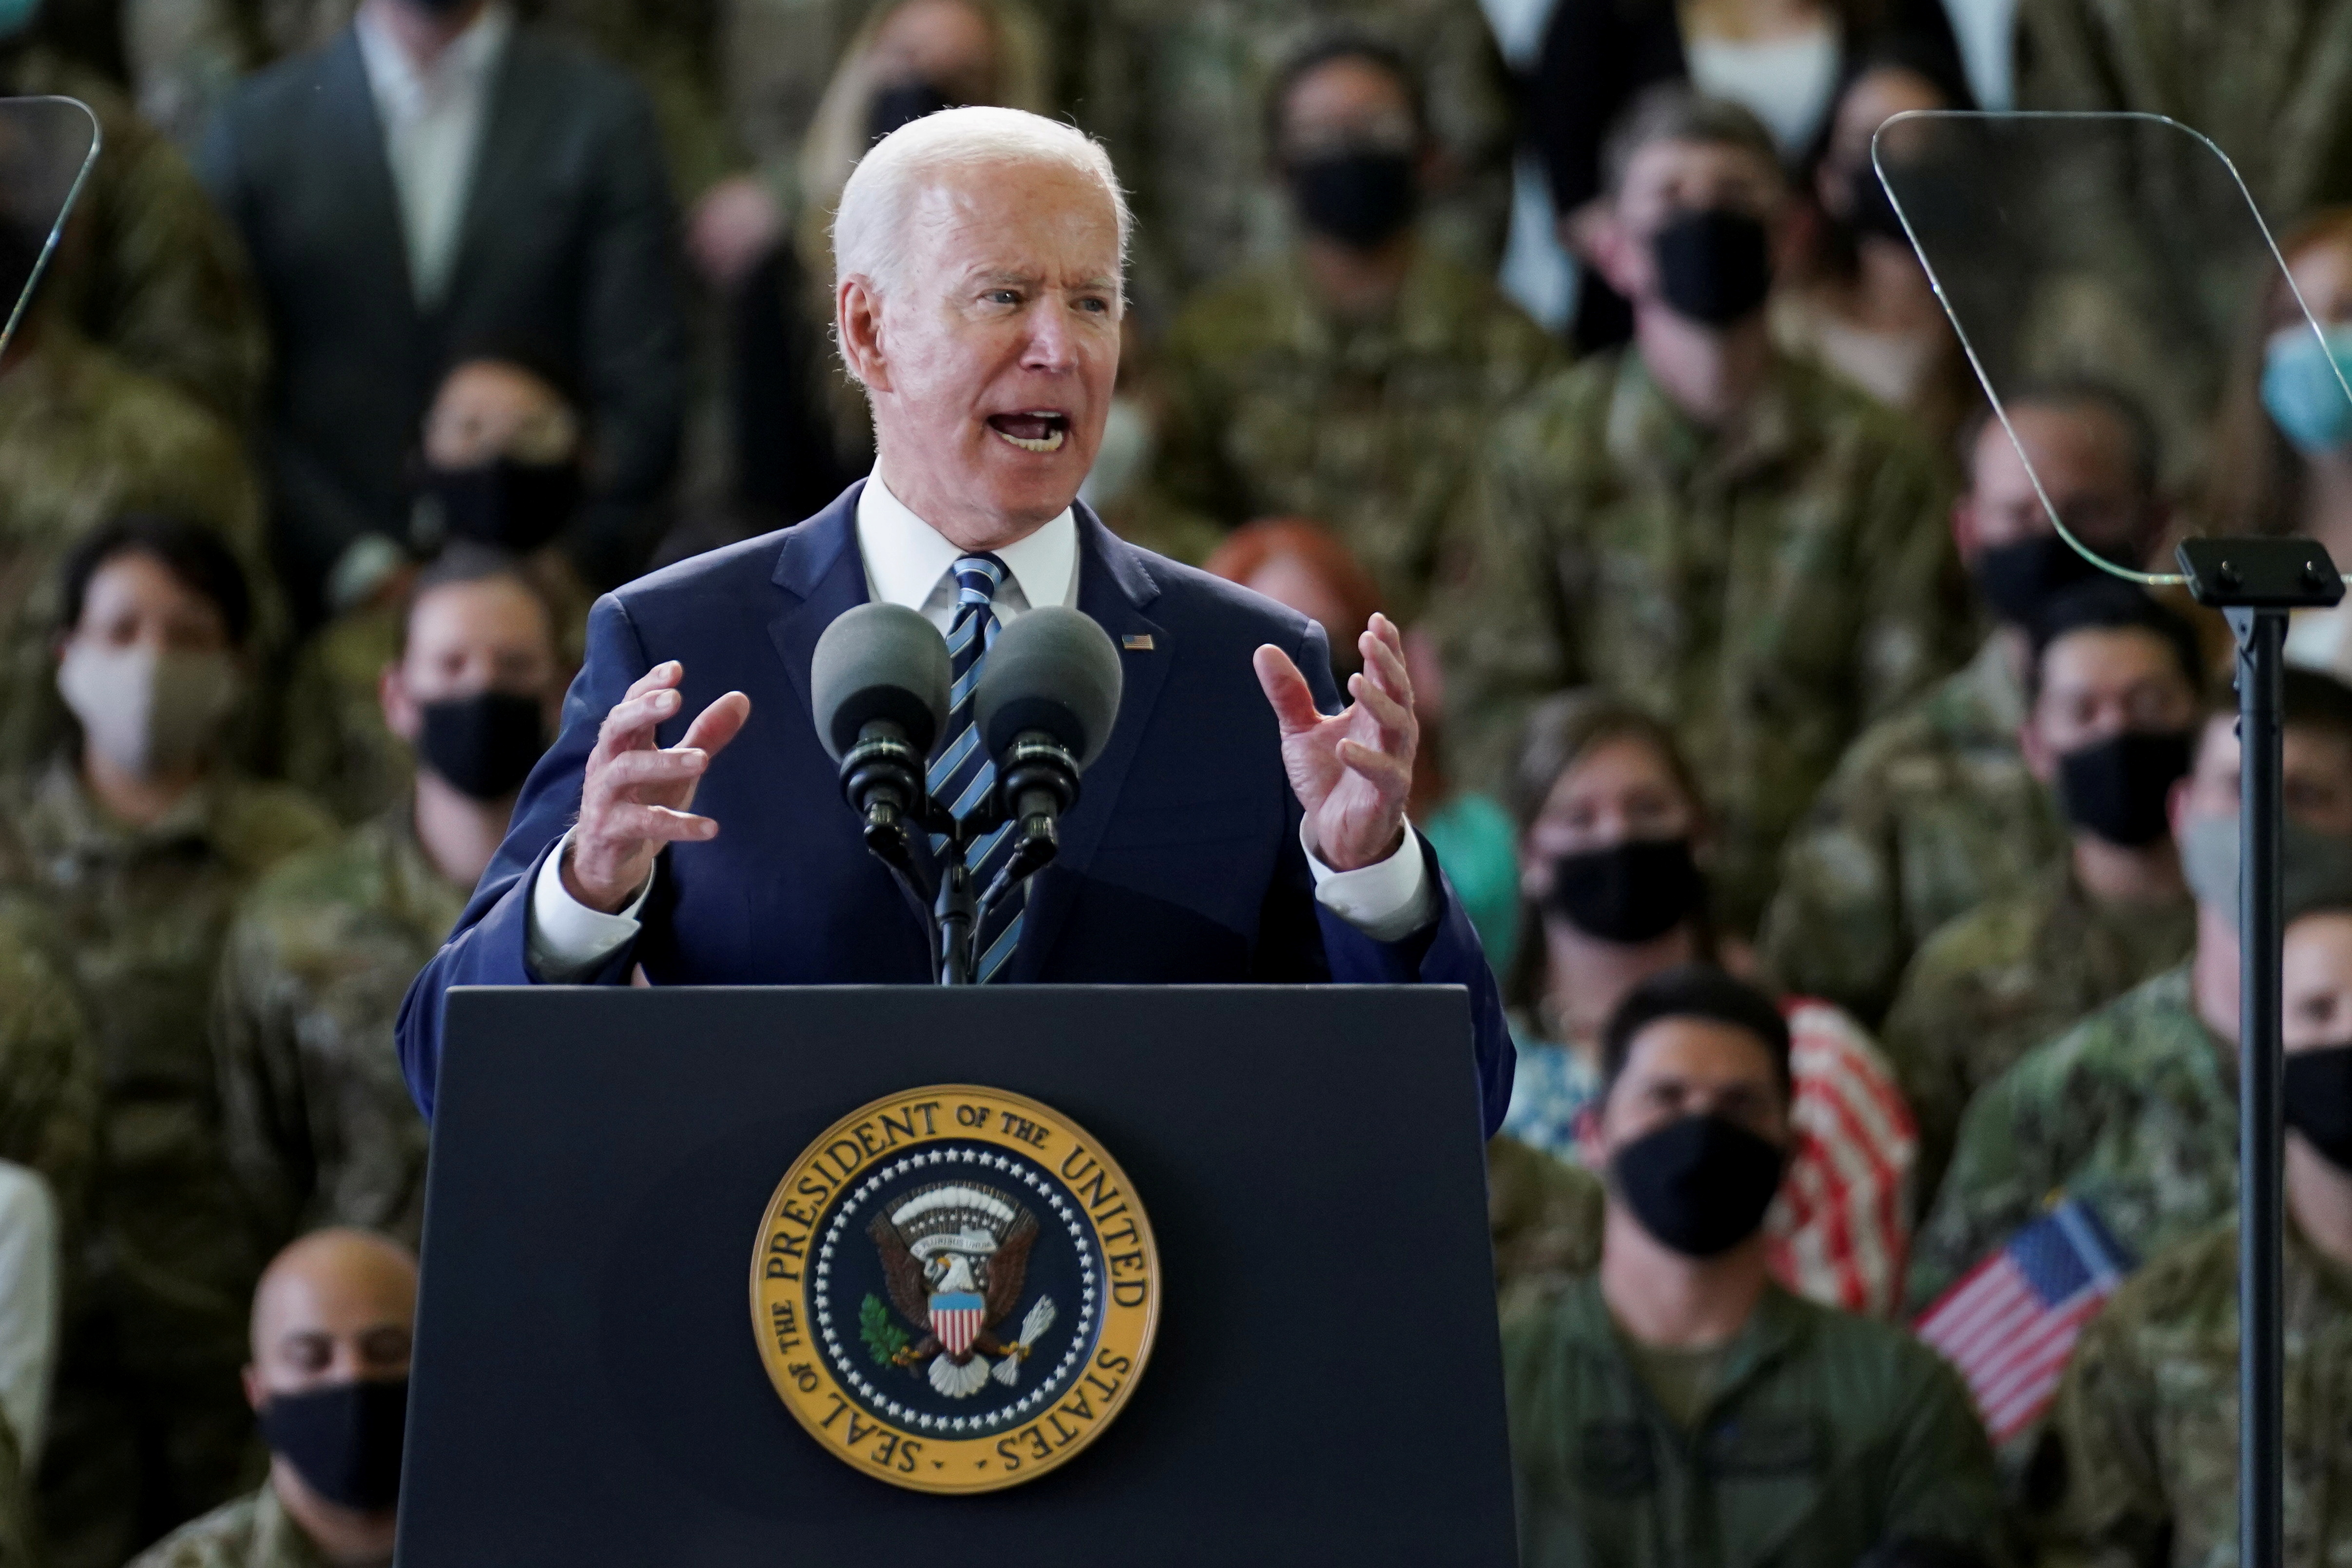 U.S. President Biden delivers remarks to U.S. Air Force personnel at RAF Mildenhall